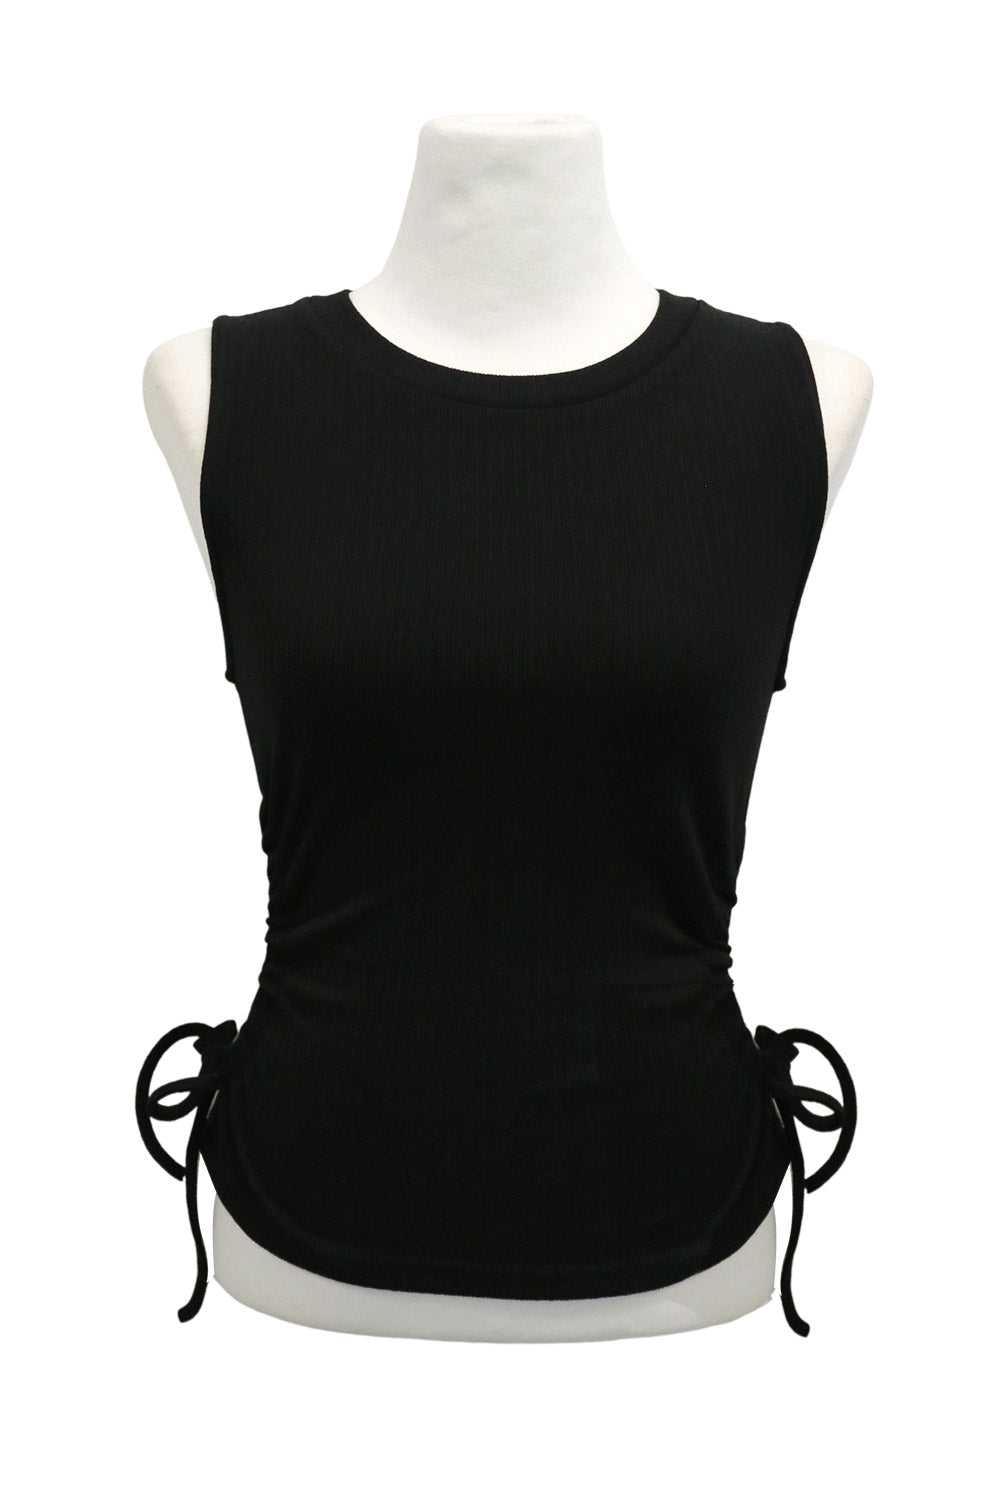 storets.com Giselle Ribbed Cutout Top